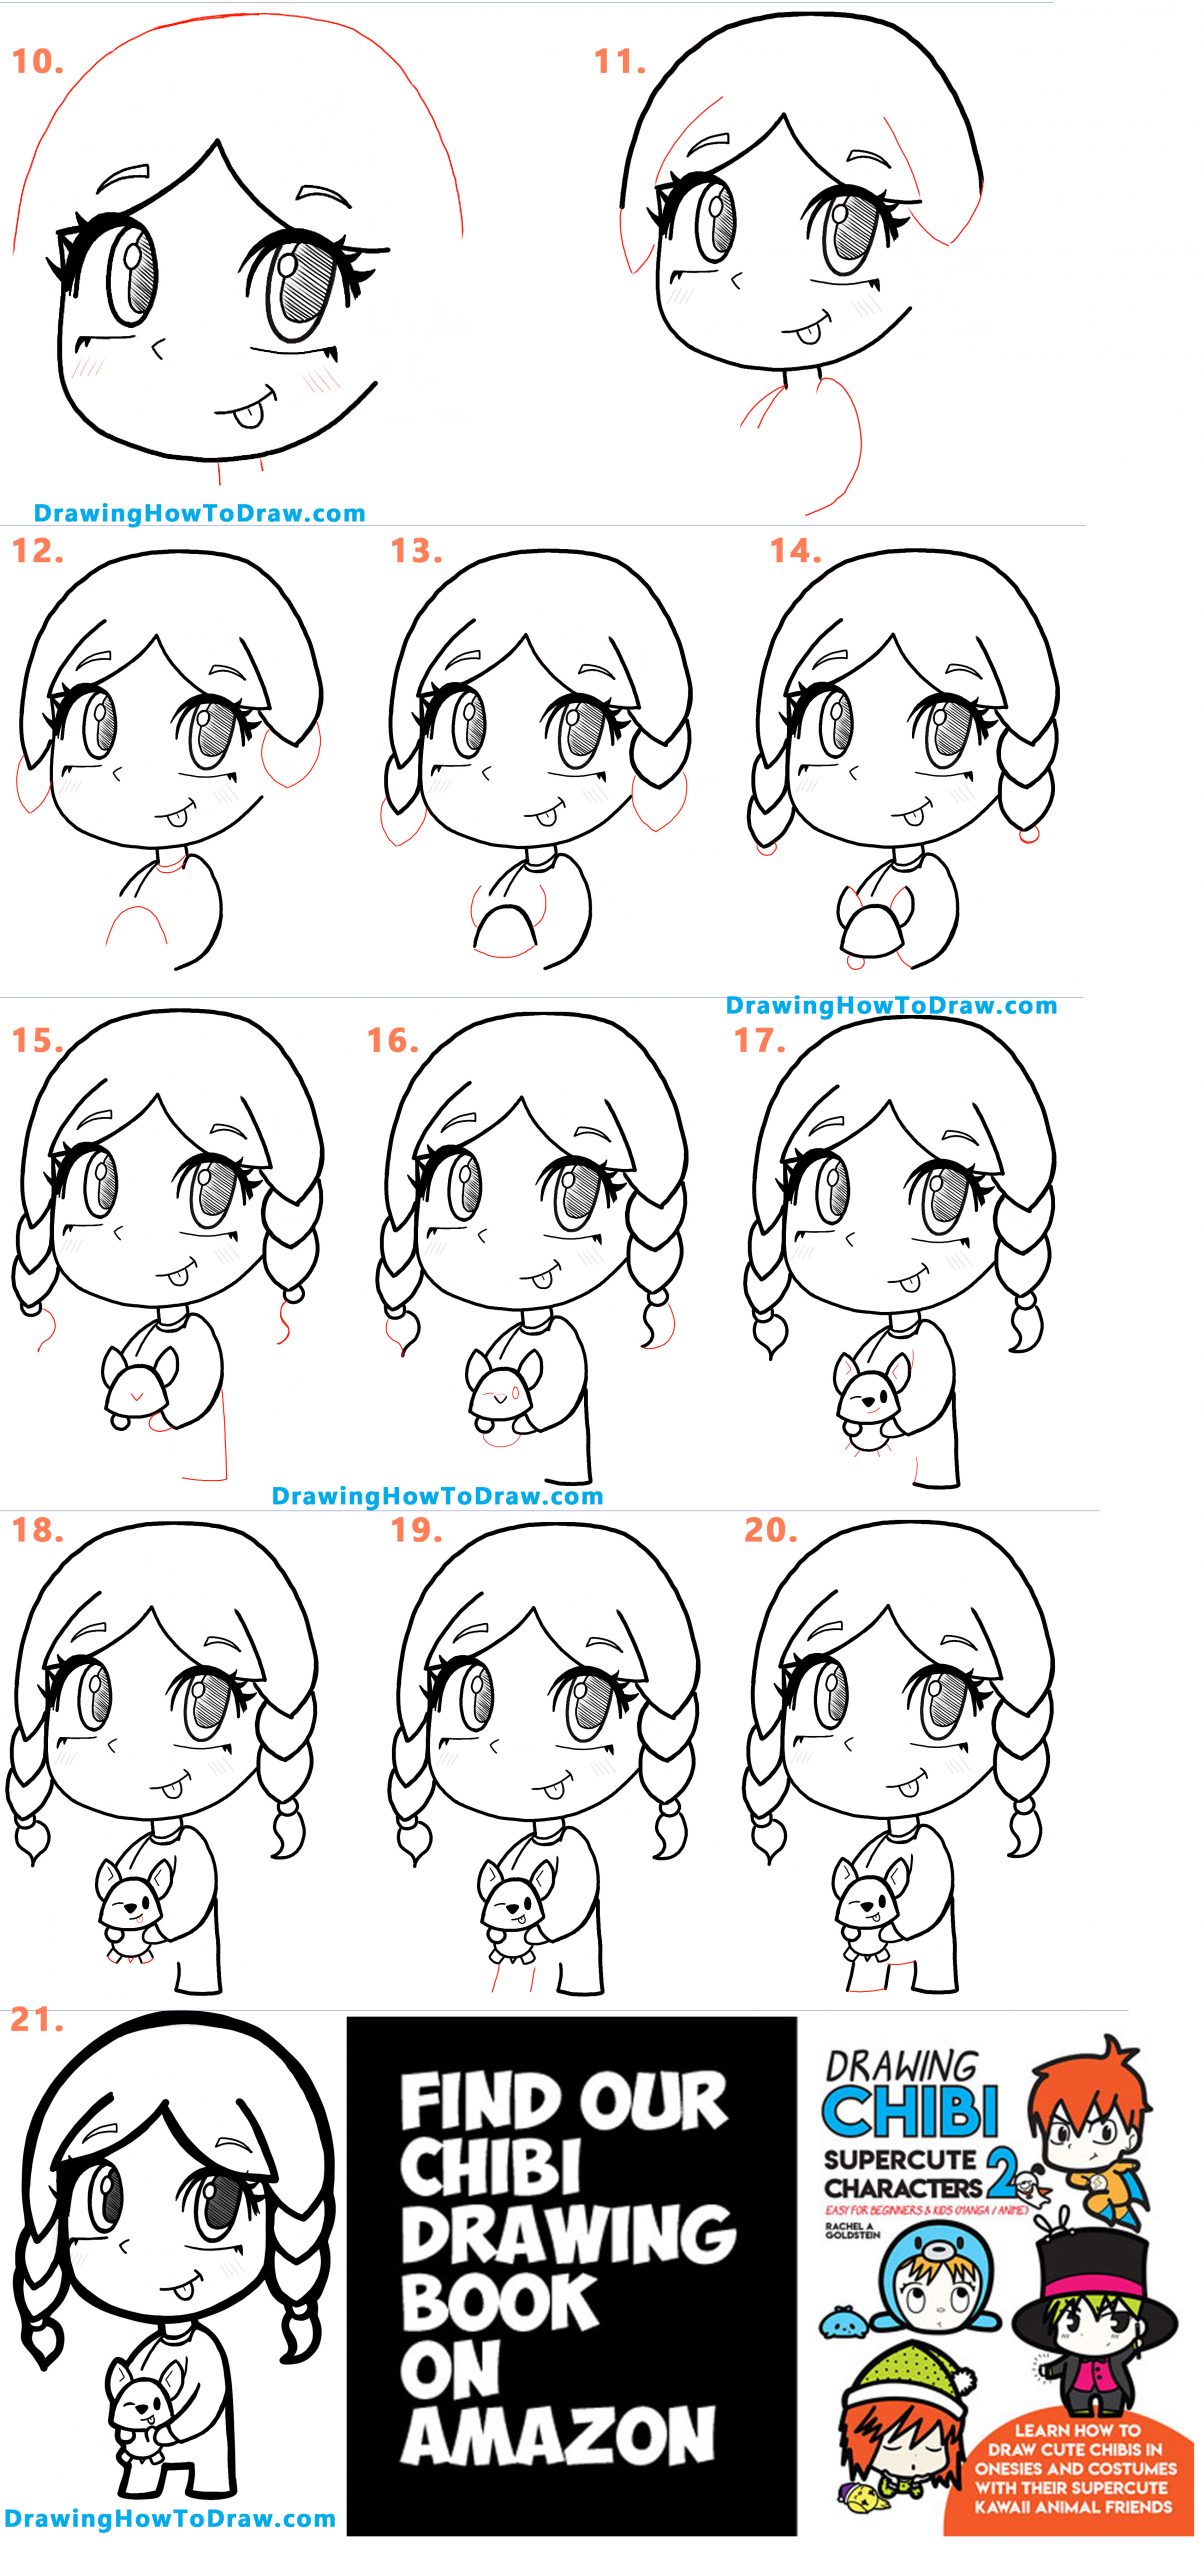 How To Draw Anime Manga Chibi Girl With Her Corgi Puppy How To Draw Step By Step Drawing Tutorials